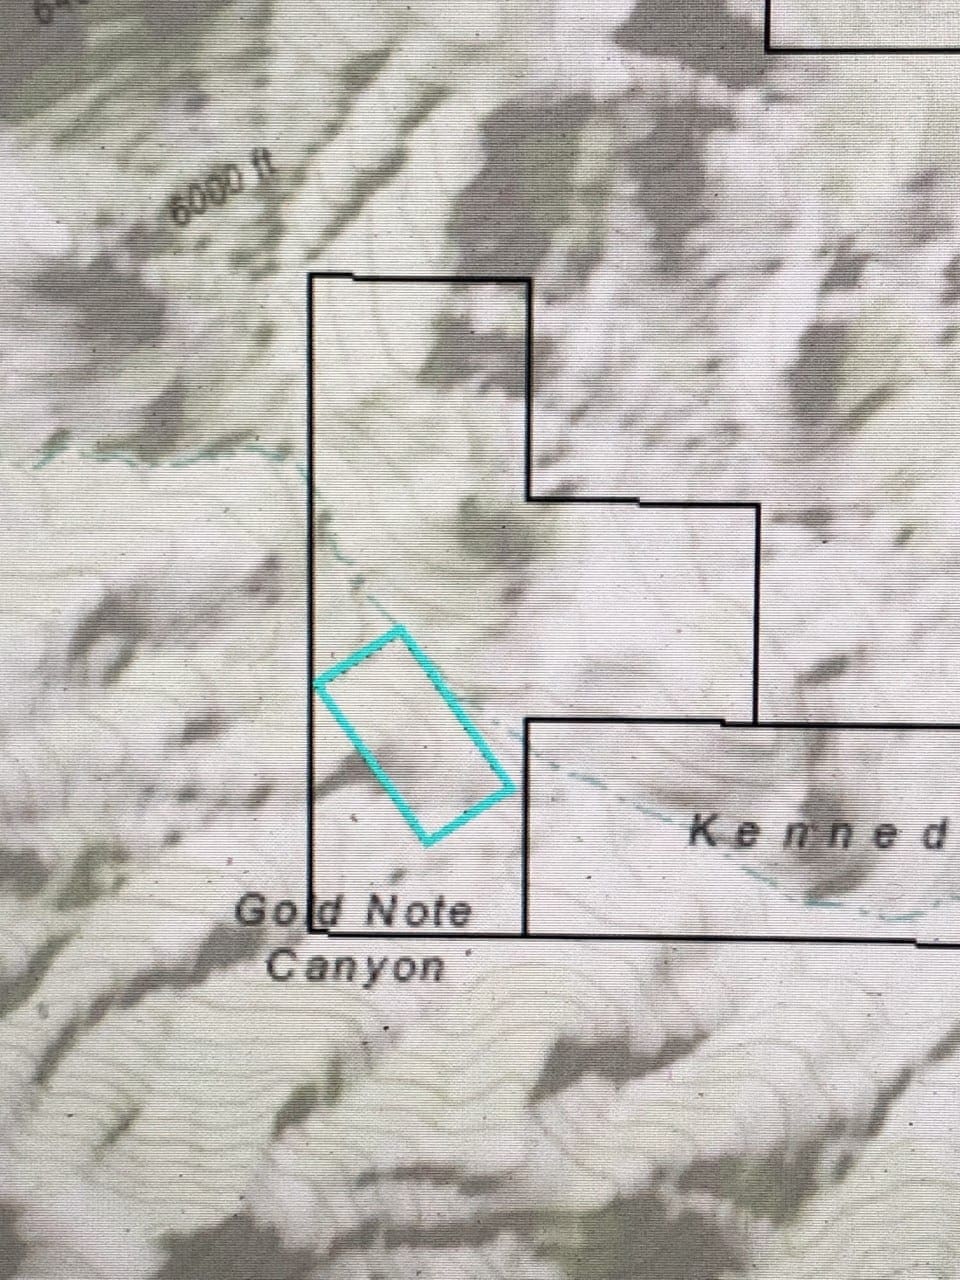 15.84 Acres in GOLD NOTE CANYON, HIDDEN TREASURE #1, SUR 2097 – A PATENTED MINING CLAIM -PAST PRODUCER OF GOLD, SILVER & ZINC photo 31